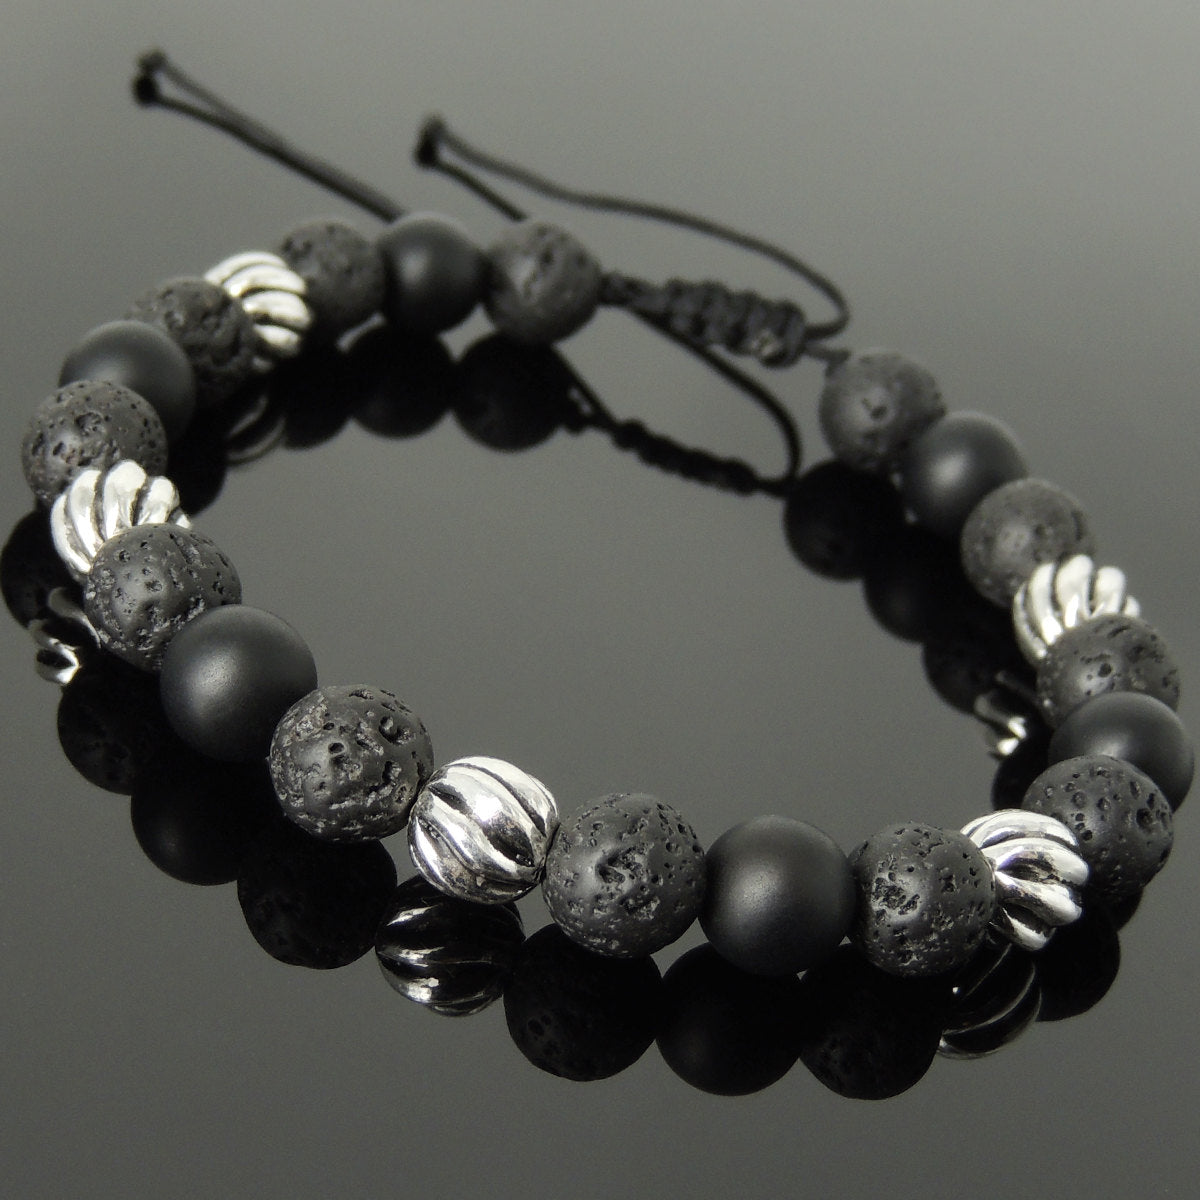 8mm Matte Black Onyx & Lava Rock Adjustable Stone Braided Bracelet with S925 Sterling Silver Artisan Beads - Handmade by Gem & Silver BR1058